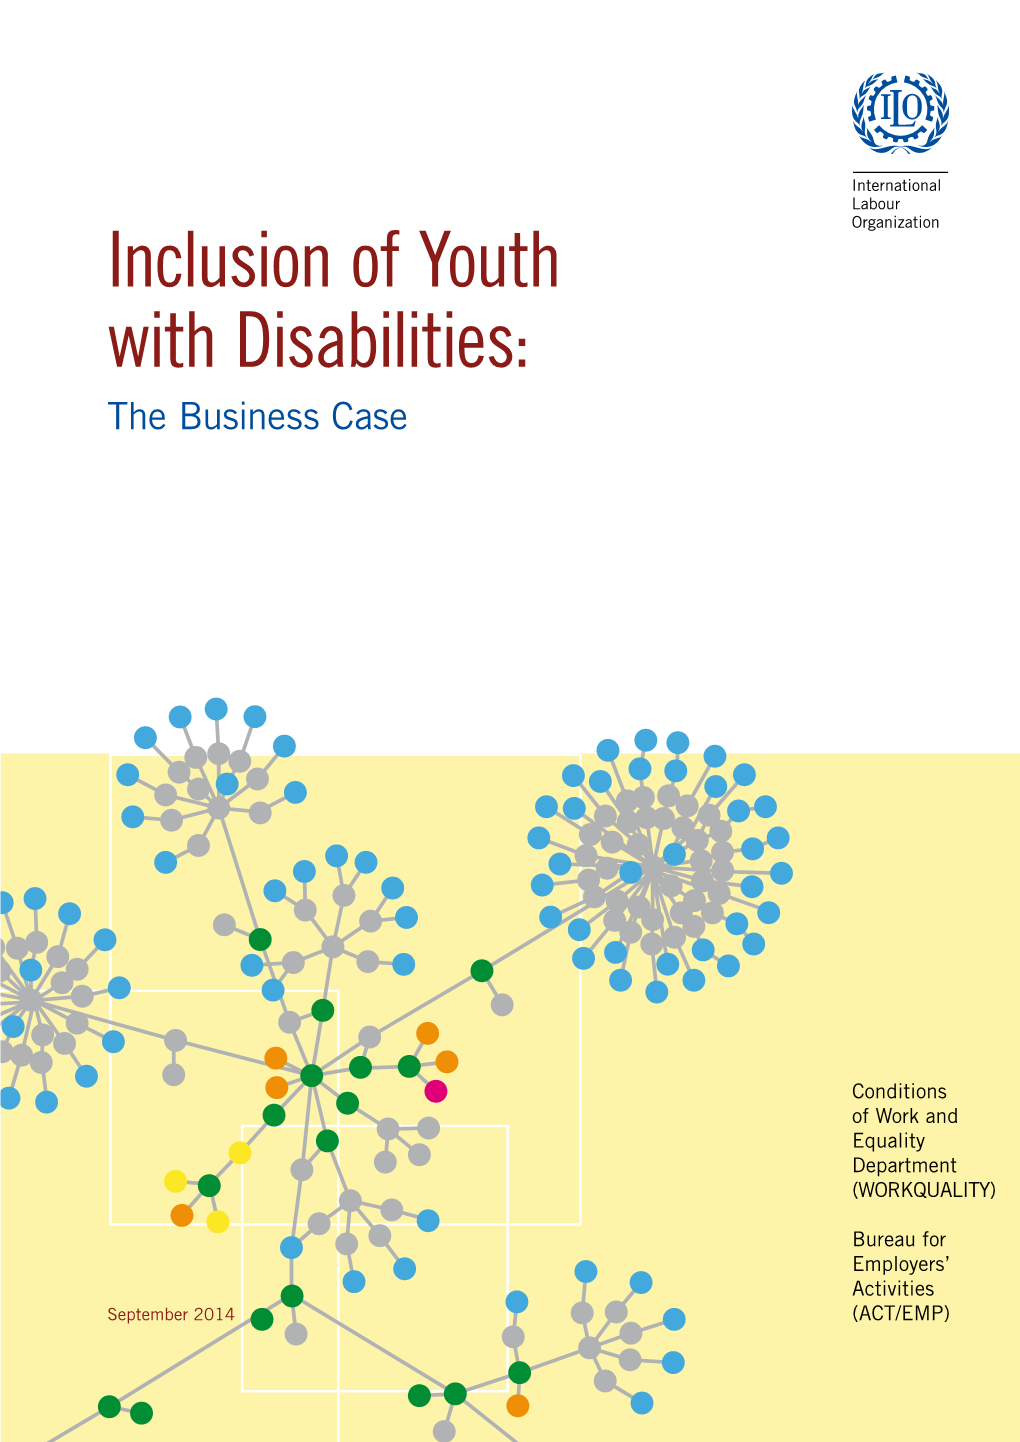 Inclusion of Youth with Disabilities: the Business Case